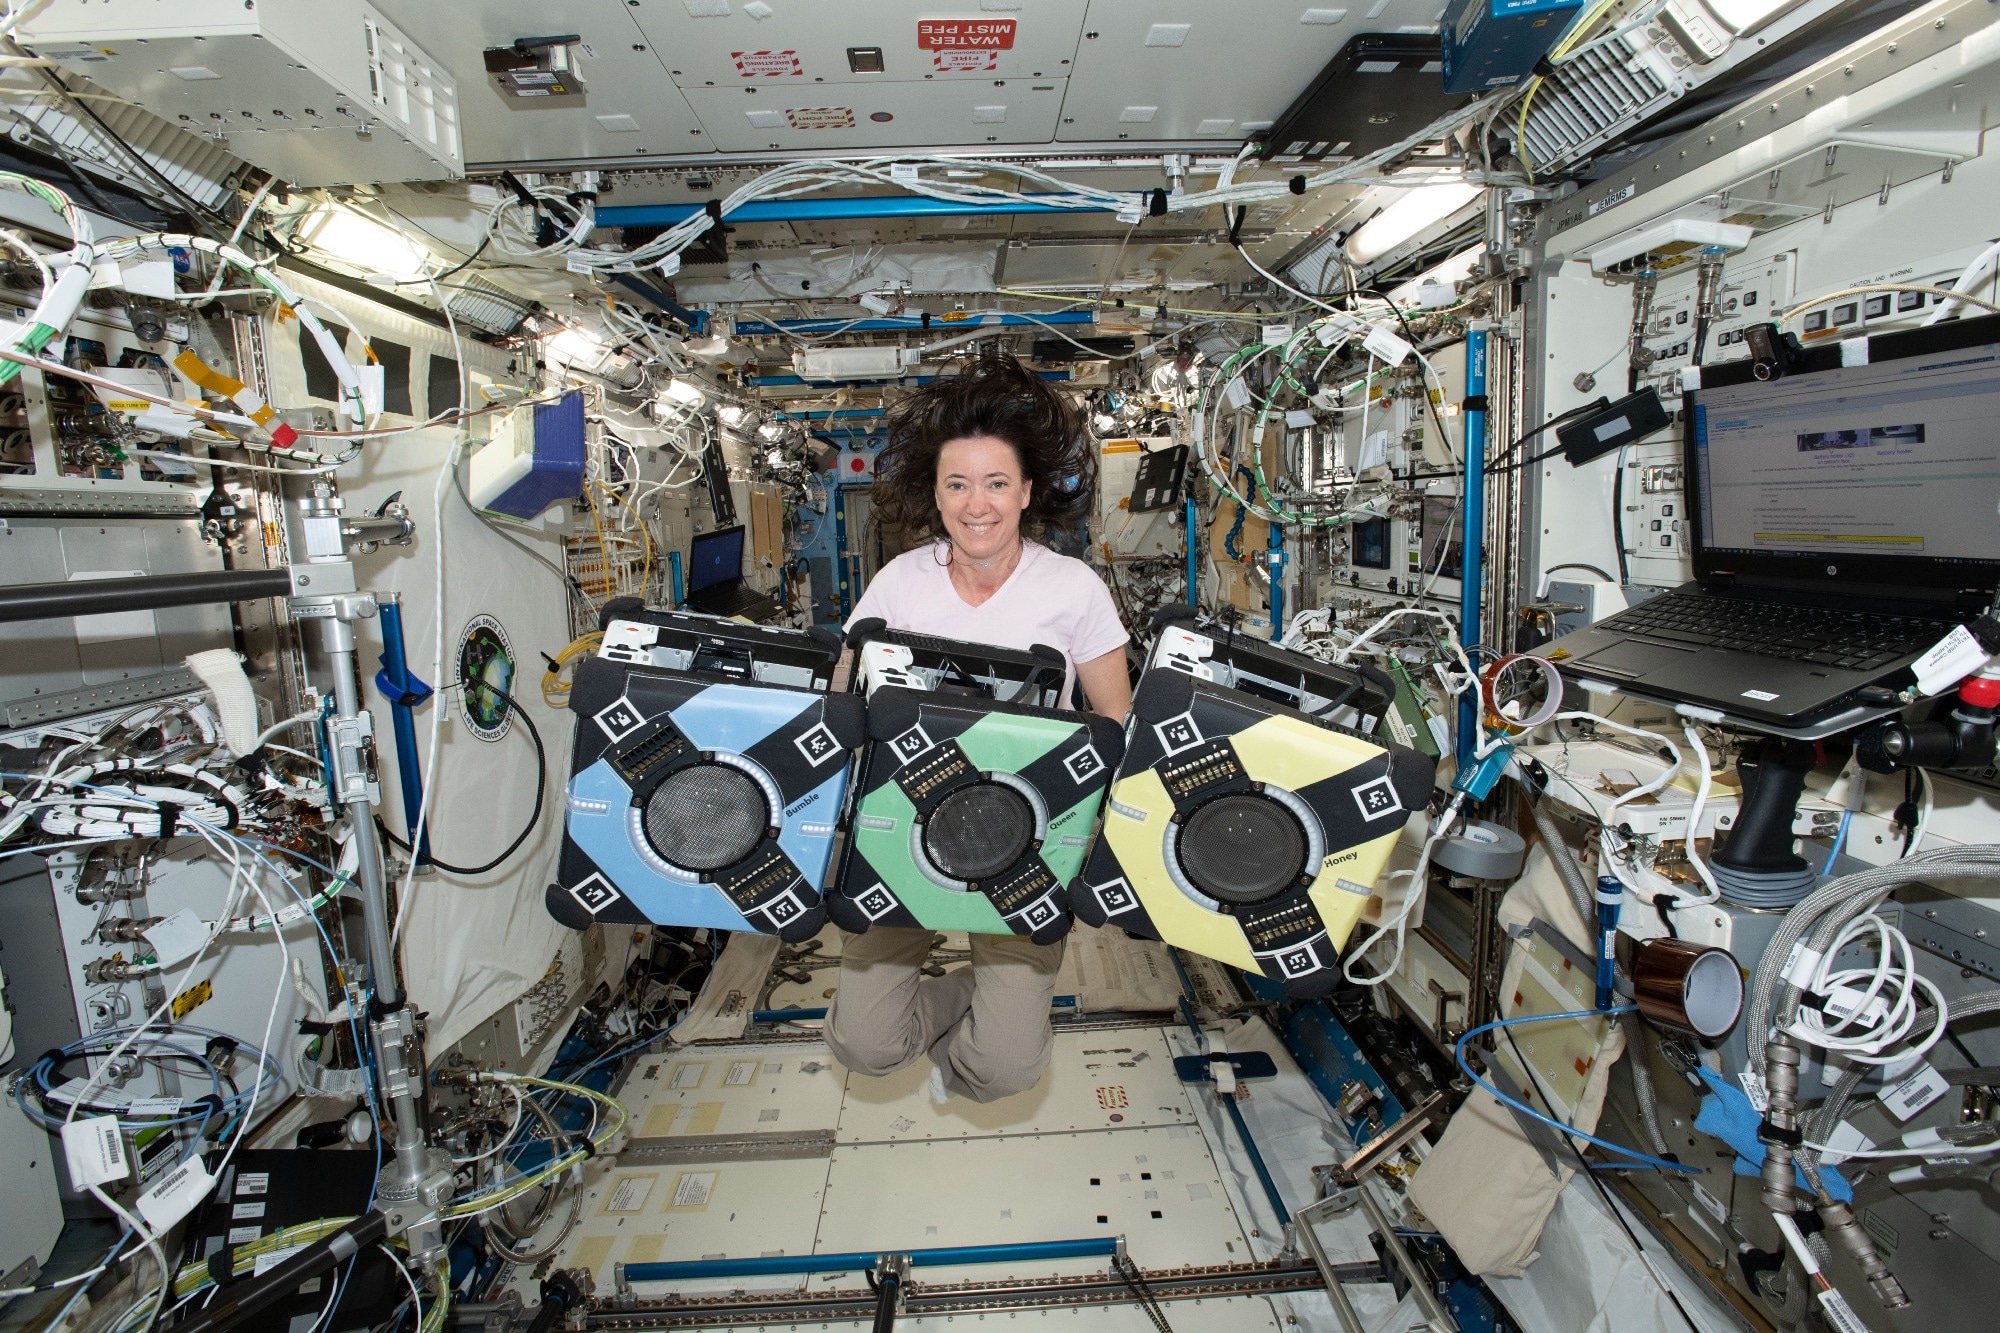 Astrobees: The Future of Space Research and Education Aboard the International Space Station